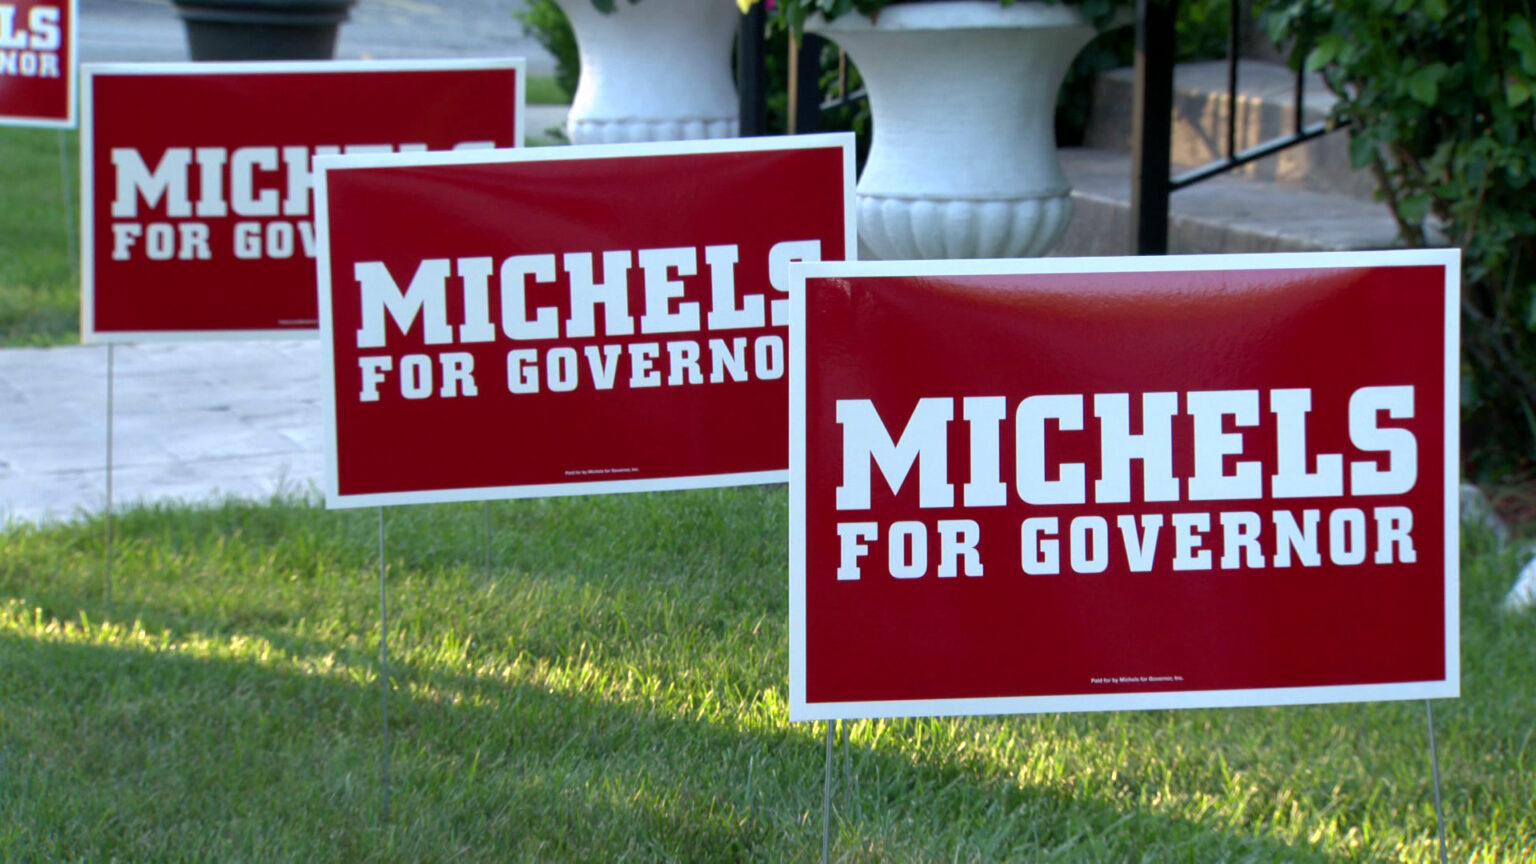 Multiple campaign yard signs reading Michels for Governor are placed in a lawn, with a walkway, stairs and planters in the background.